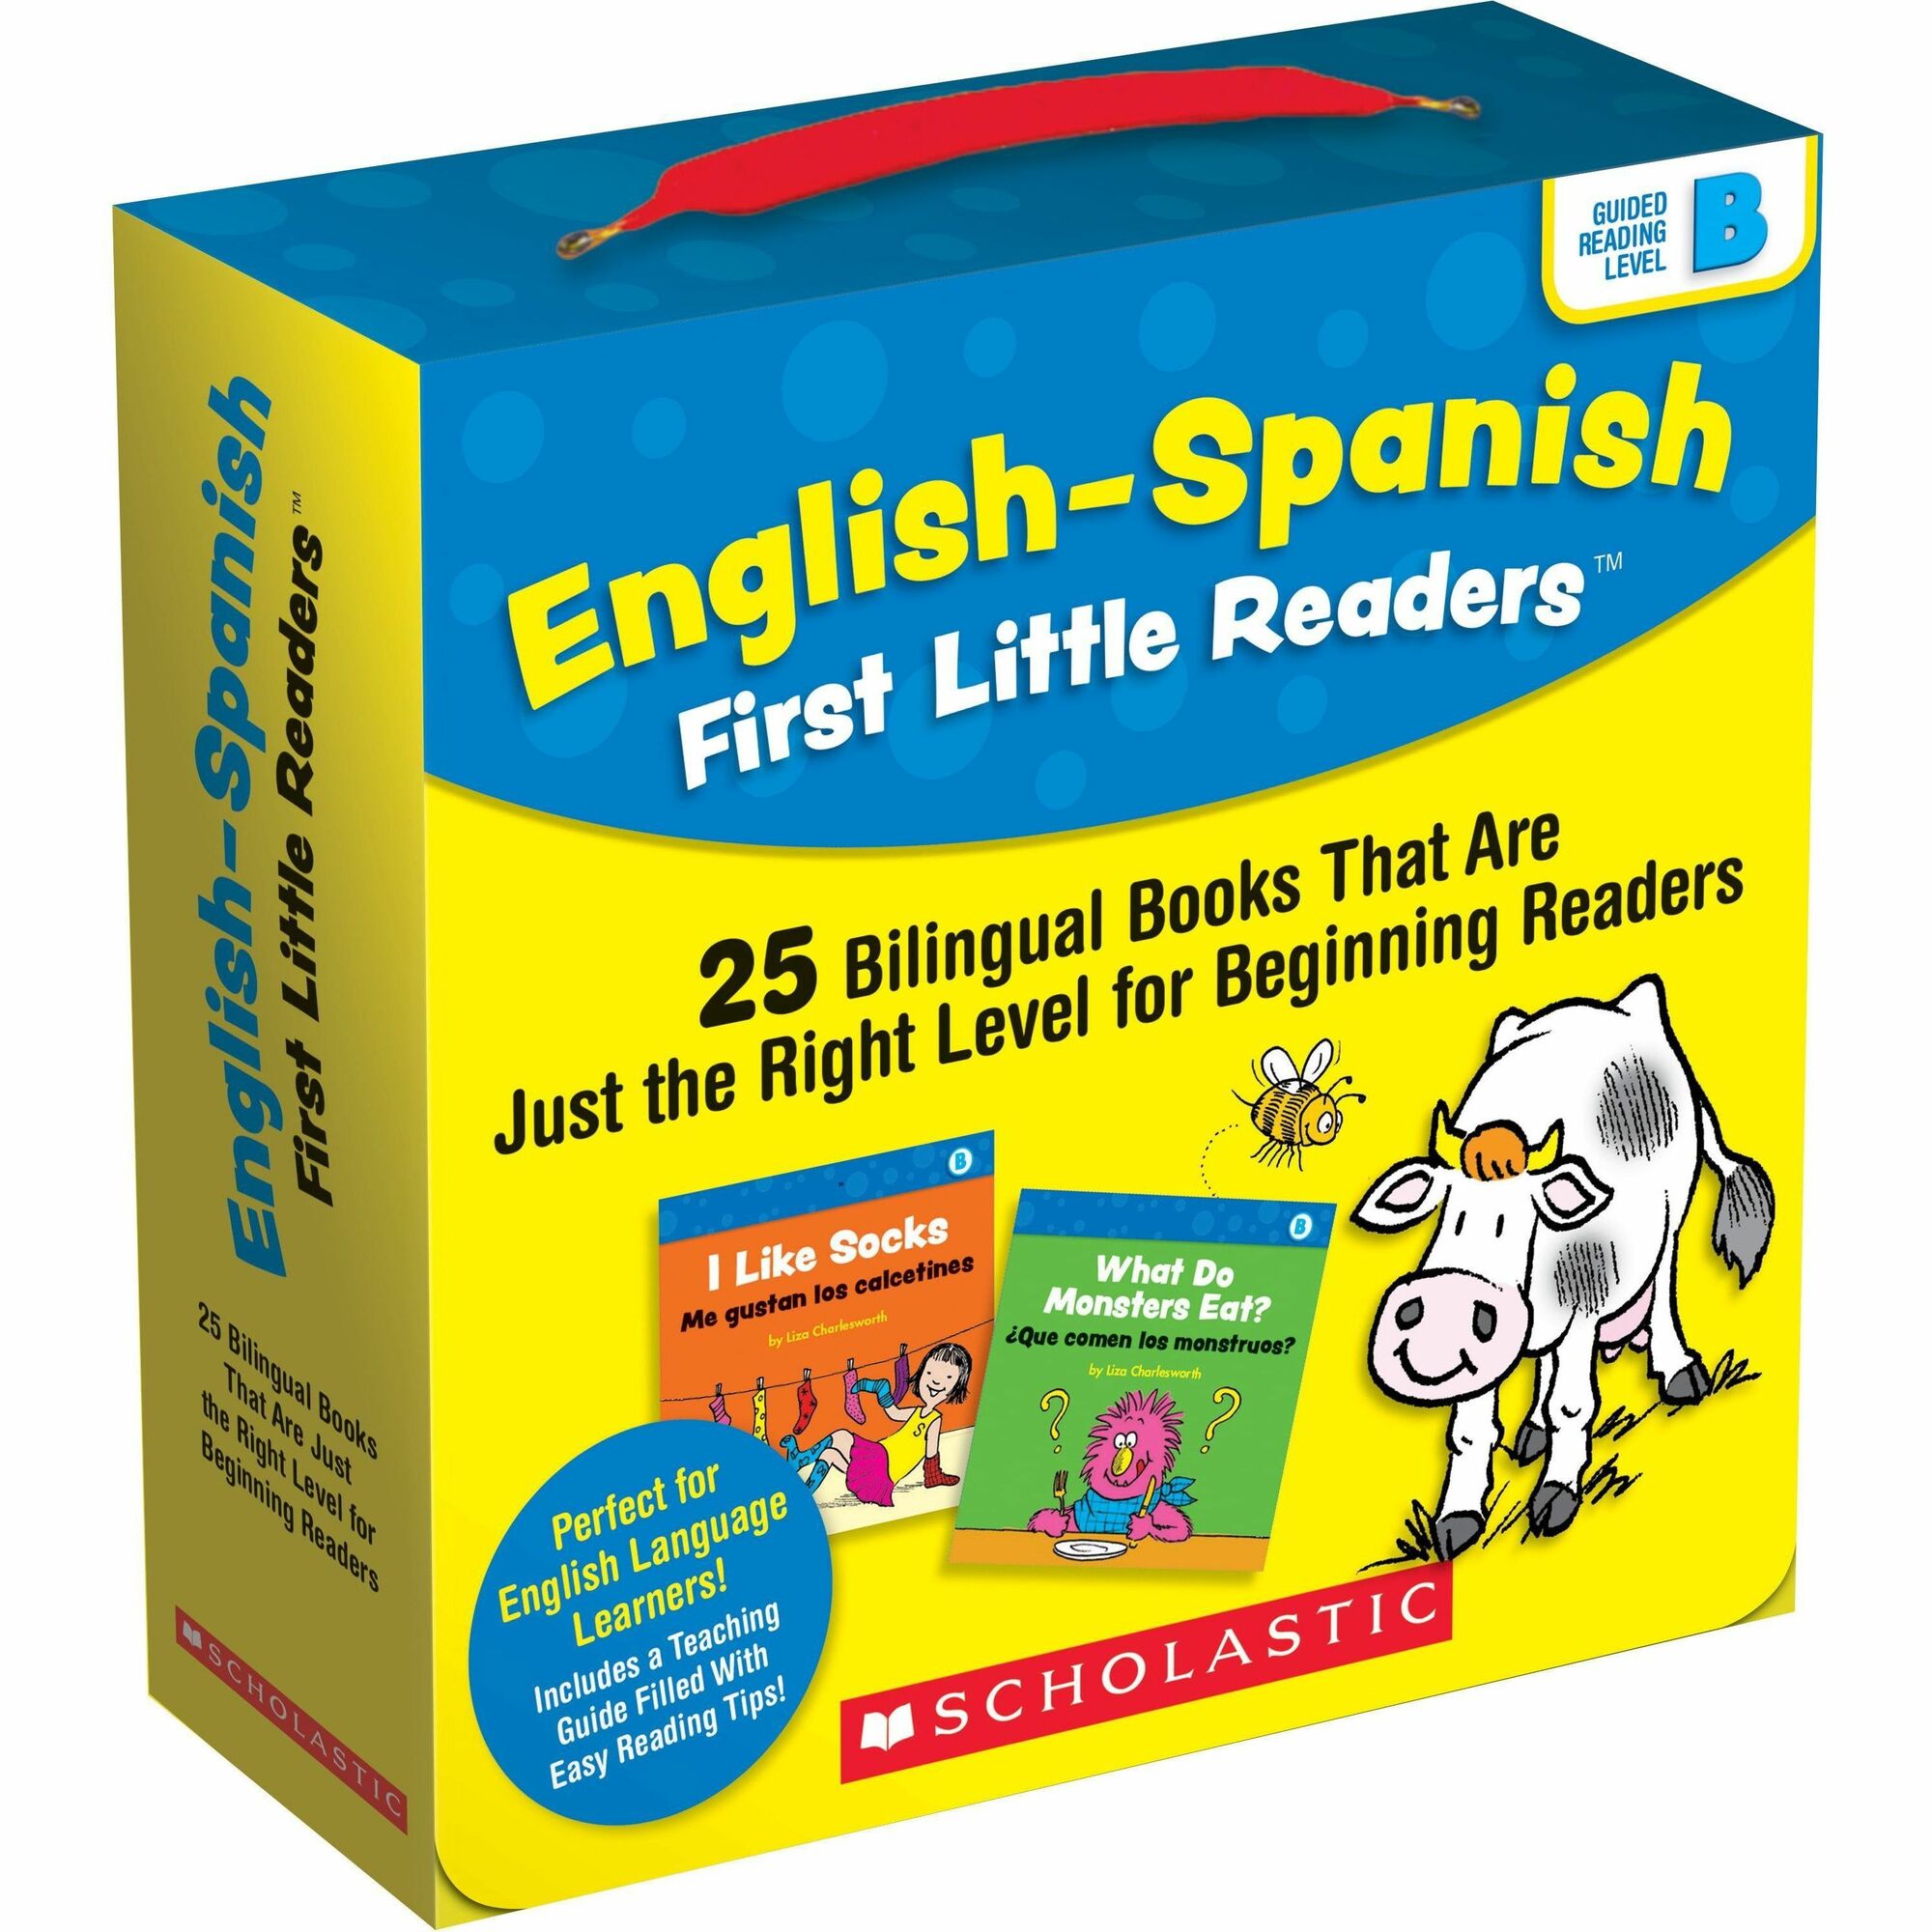 scholastic-first-little-readers-book-set-printed-book-by-liza-charlesworth-8-pages-scholastic-teaching-resources-publication-july-1-2020-book-grade-preschool-2-english-spanish_shs1338662082 - 1